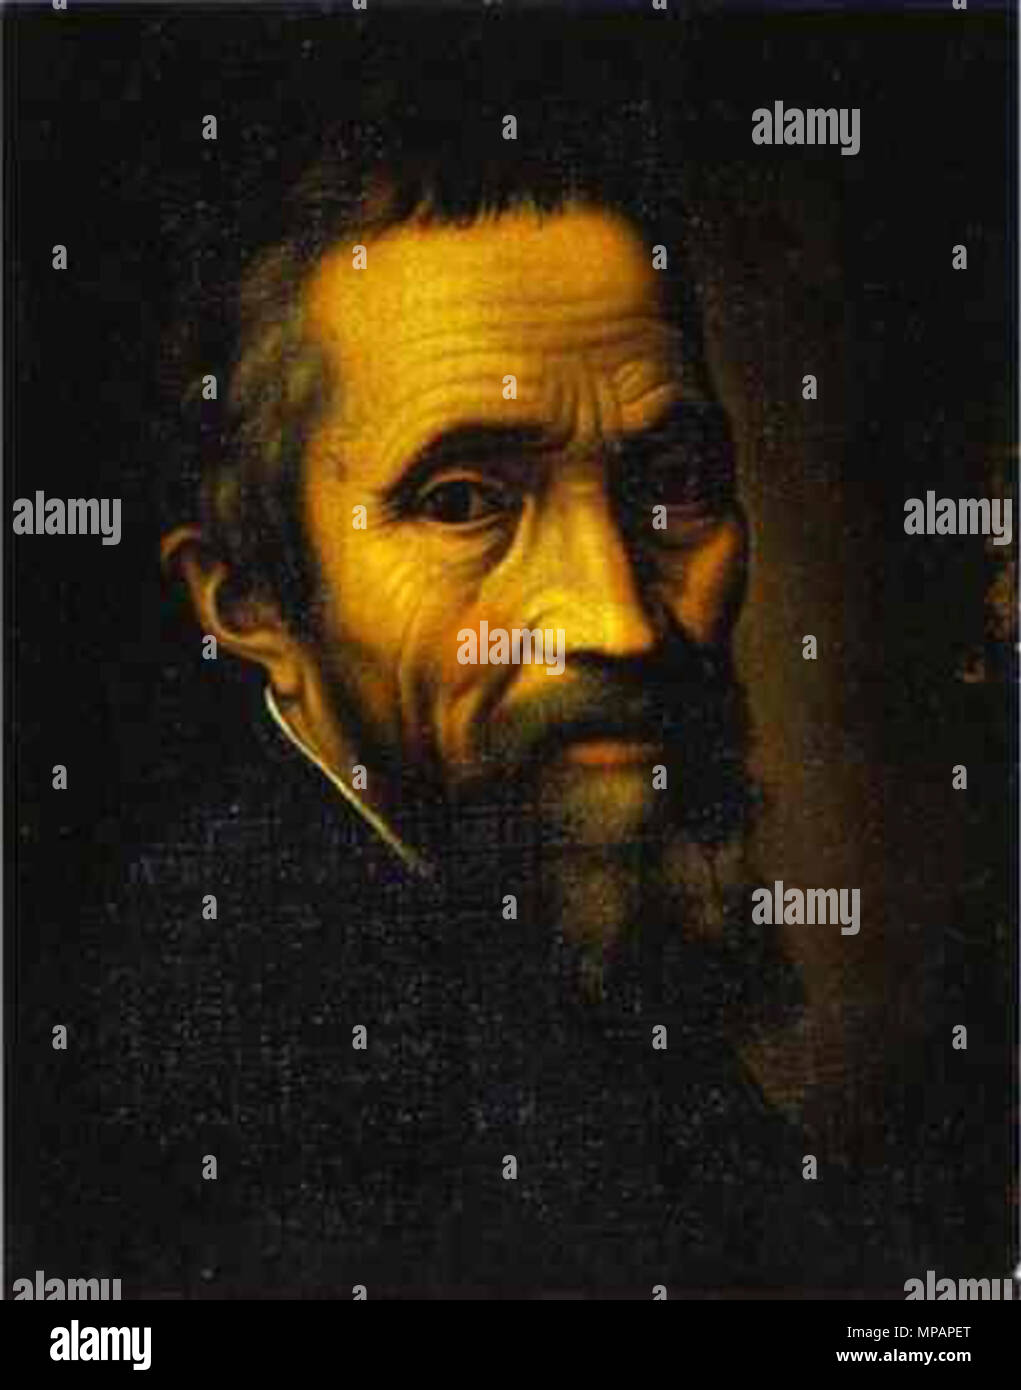 Portrait of Michelangelo at the Time of the Sistine Chapel  circa 1535.    Marcello Venusti  (1512/1515–1579)     Alternative names Mazzo di Valtellina  Description Italian painter and fresco painter  Date of birth/death between 1512 and 1515 14 October 1579  Location of birth/death Como Rome  Work period from 1550 until 1579  Work location Rome  Authority control  : Q2716659 VIAF: 45105084 ISNI: 0000 0000 6634 7155 ULAN: 500004451 LCCN: nr91028737 WGA: VENUSTI, Marcello WorldCat 889 Michelangelo portrait Stock Photo